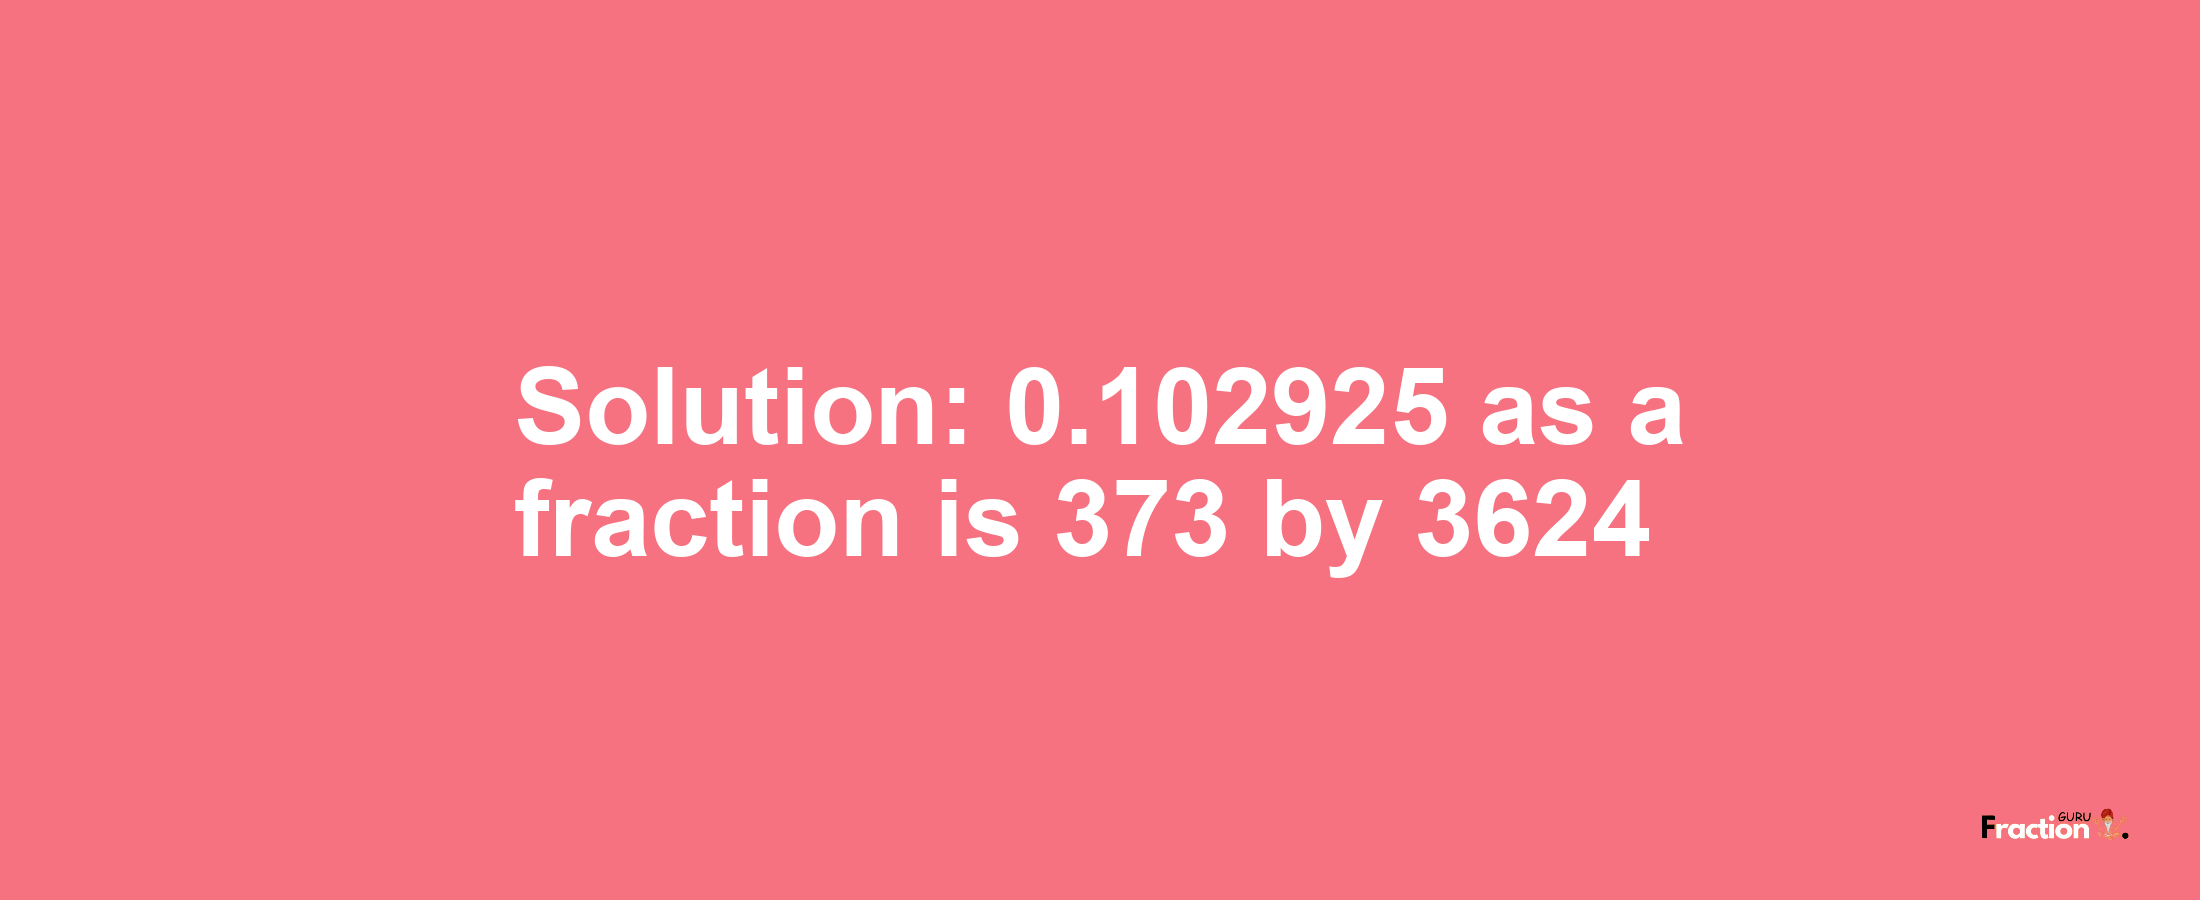 Solution:0.102925 as a fraction is 373/3624